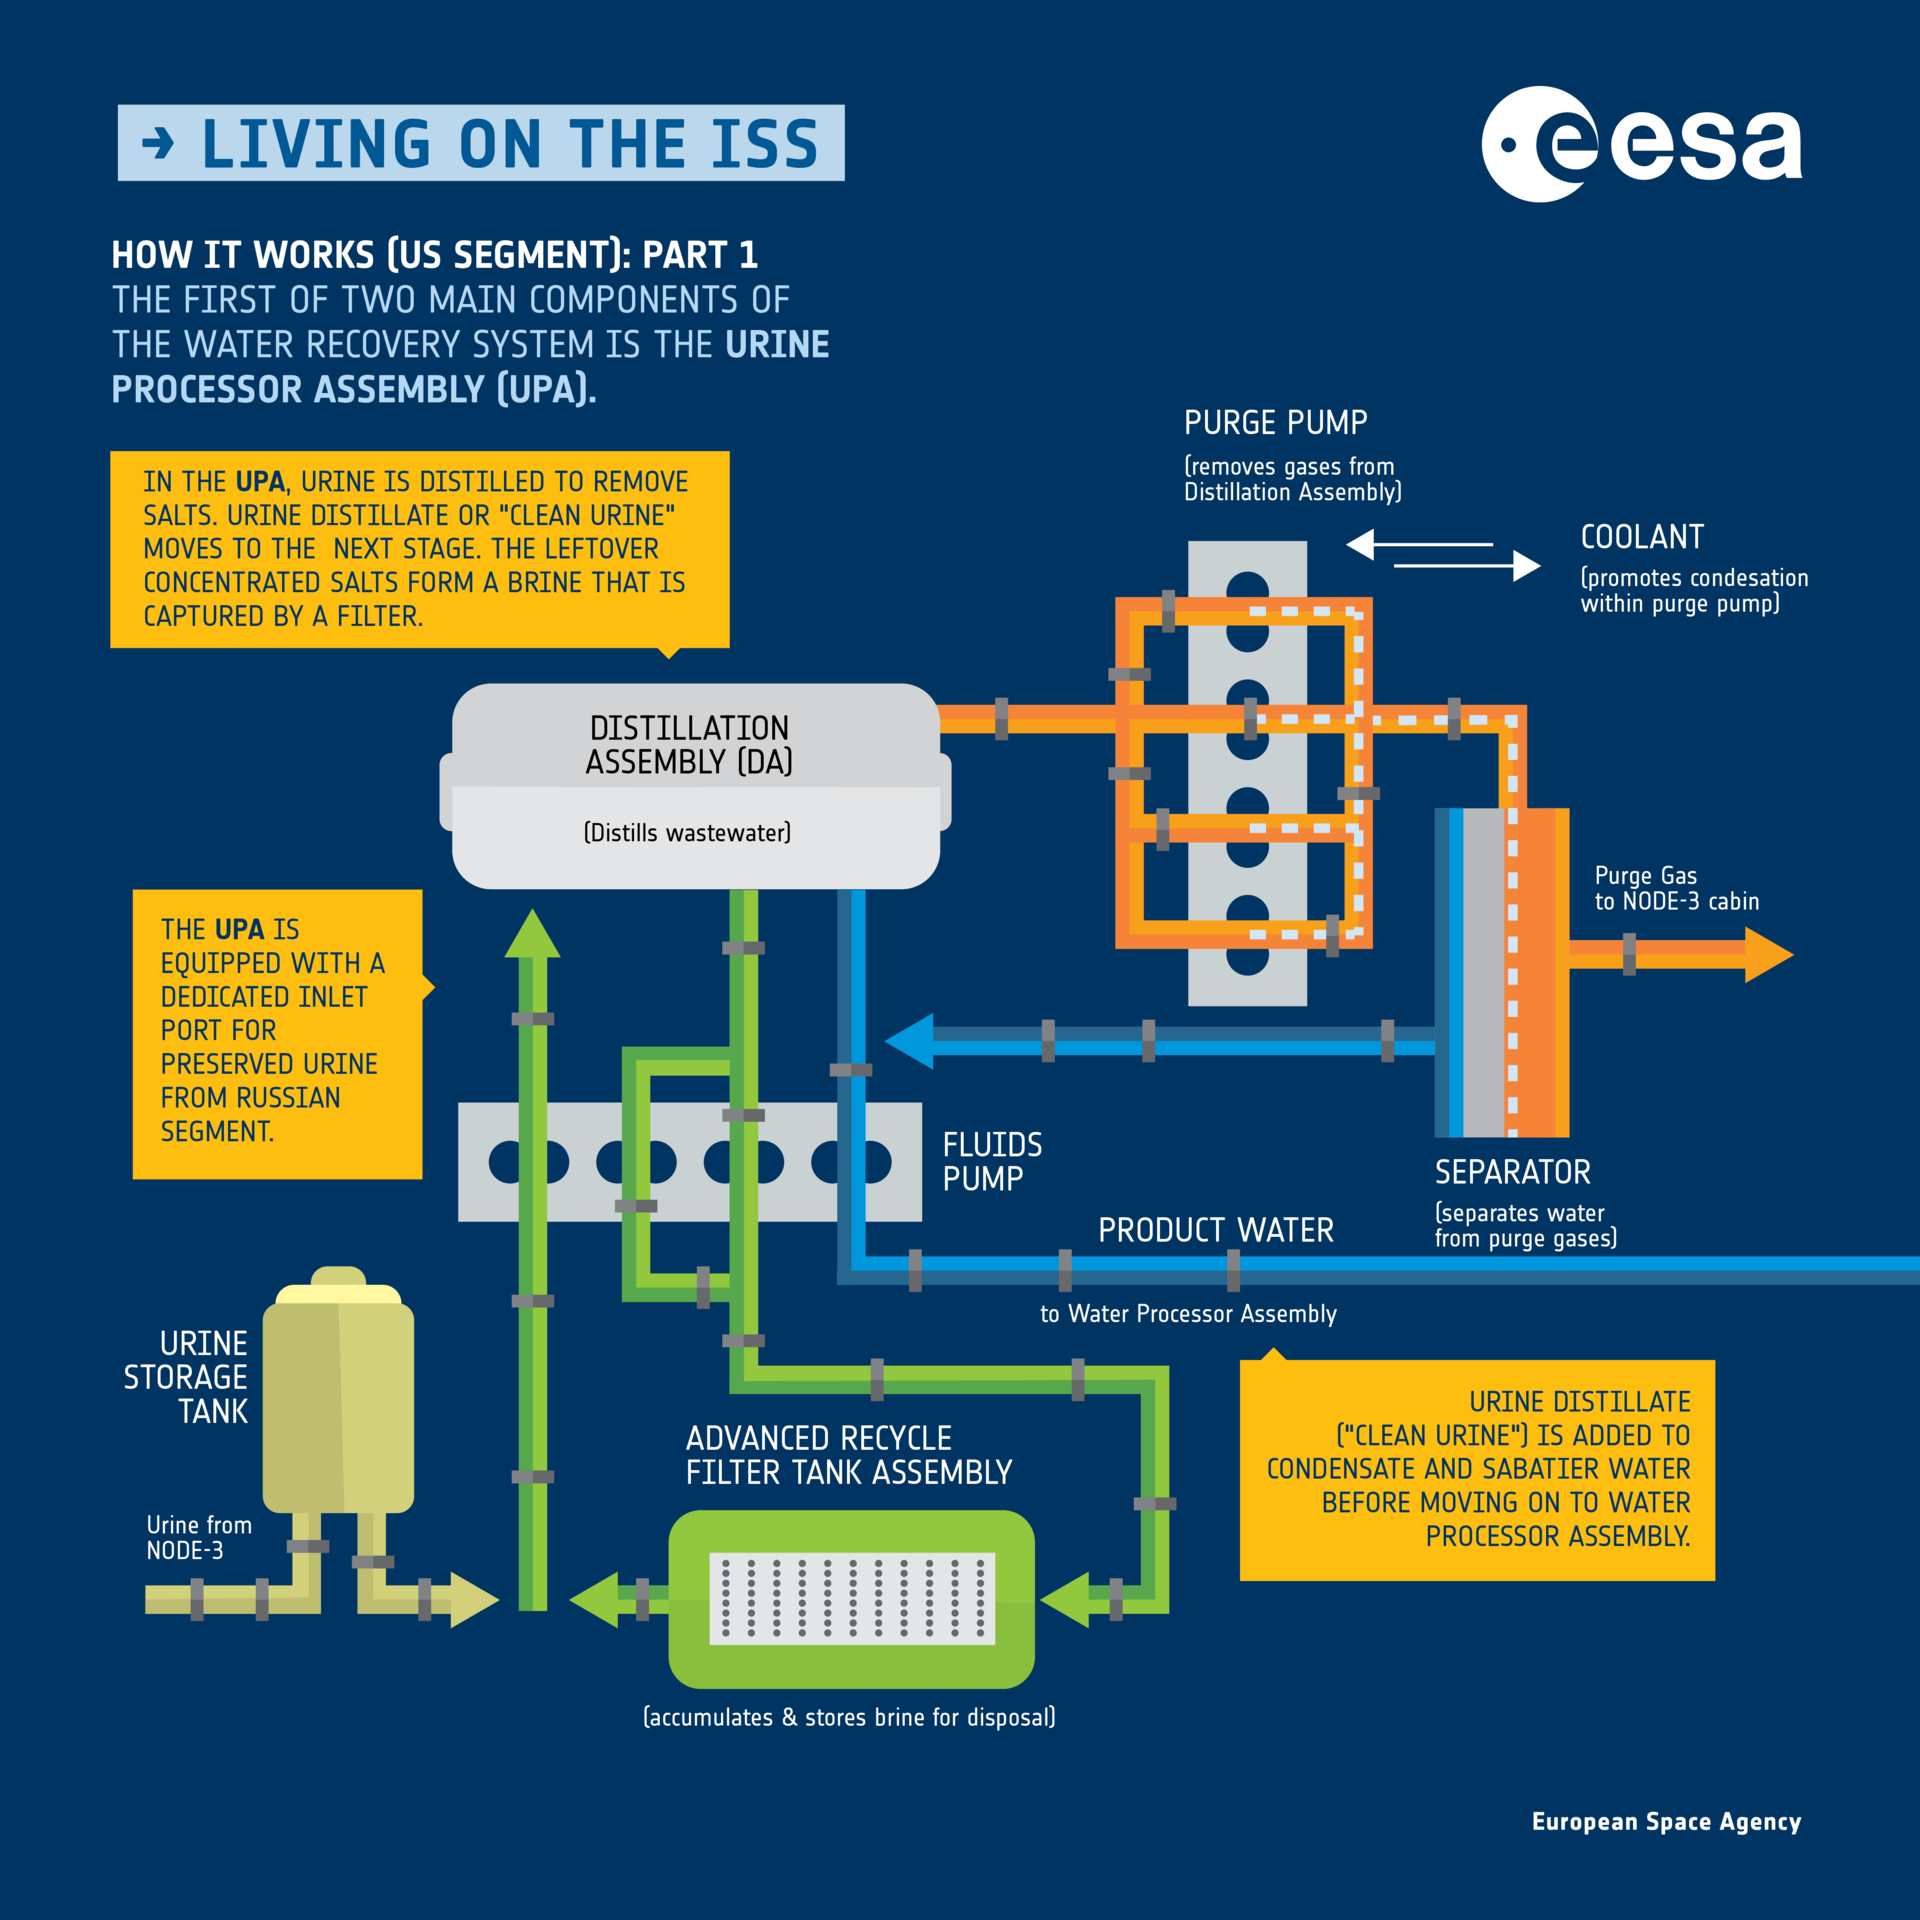 Recycling water on the ISS: How it works pt. 1